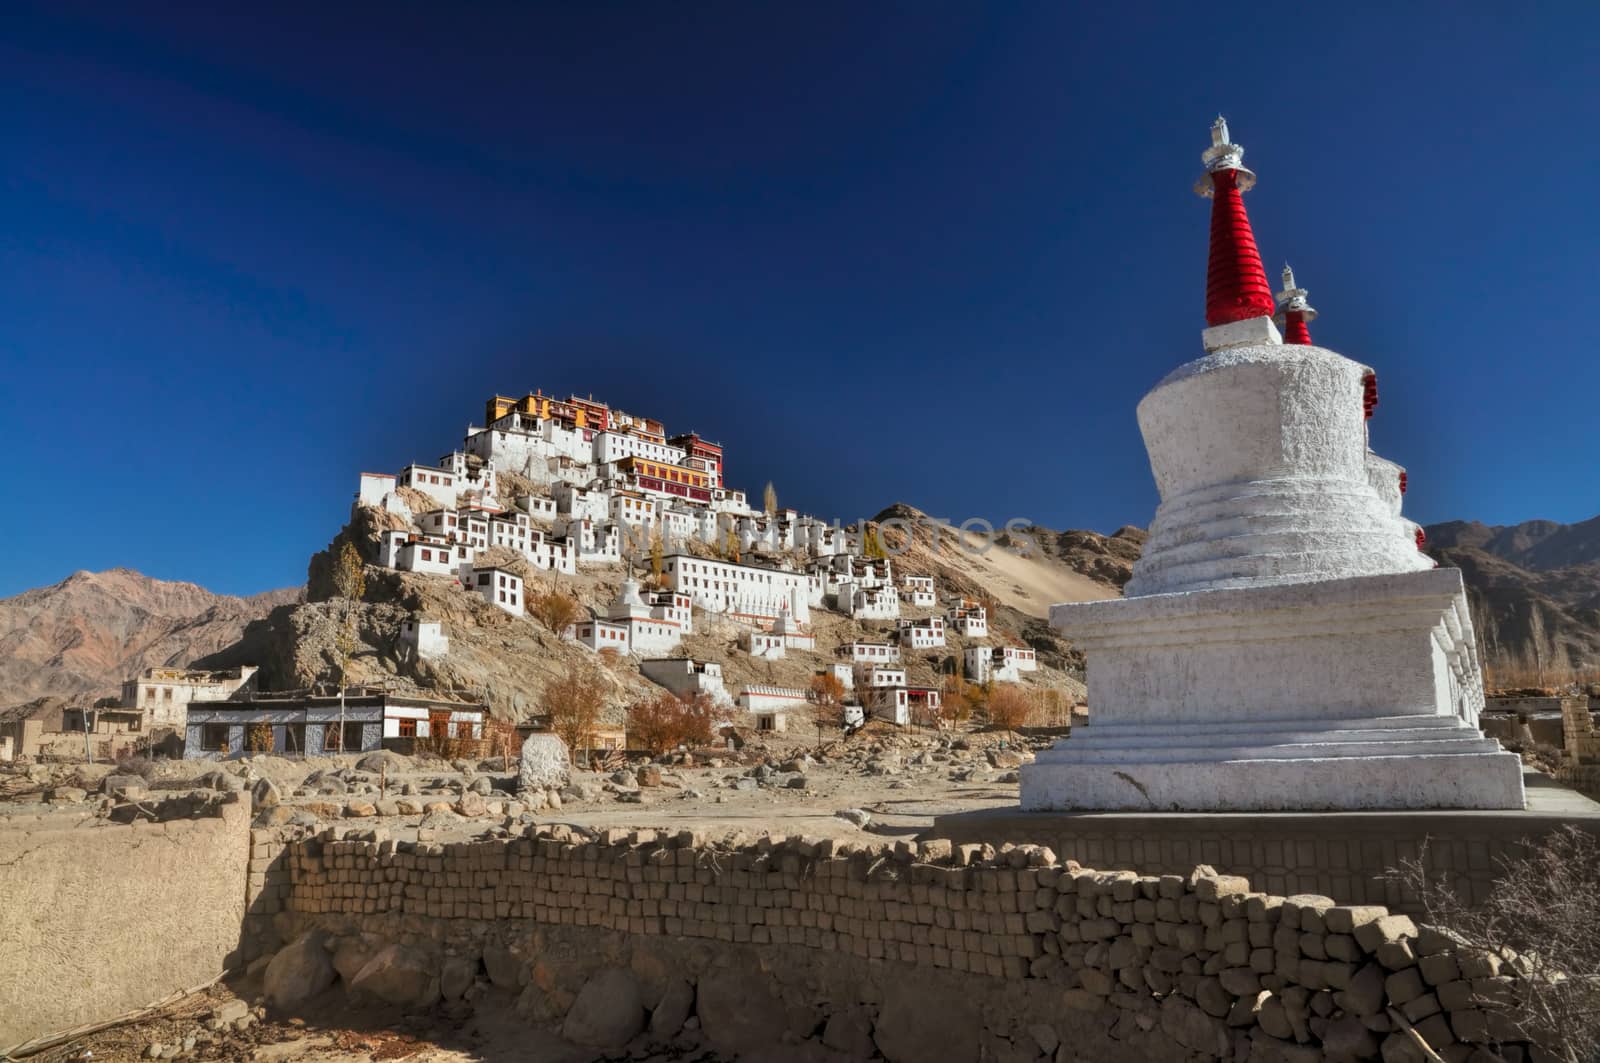 Thiksey monastery bathing in sunlight surrounded by mountains, India